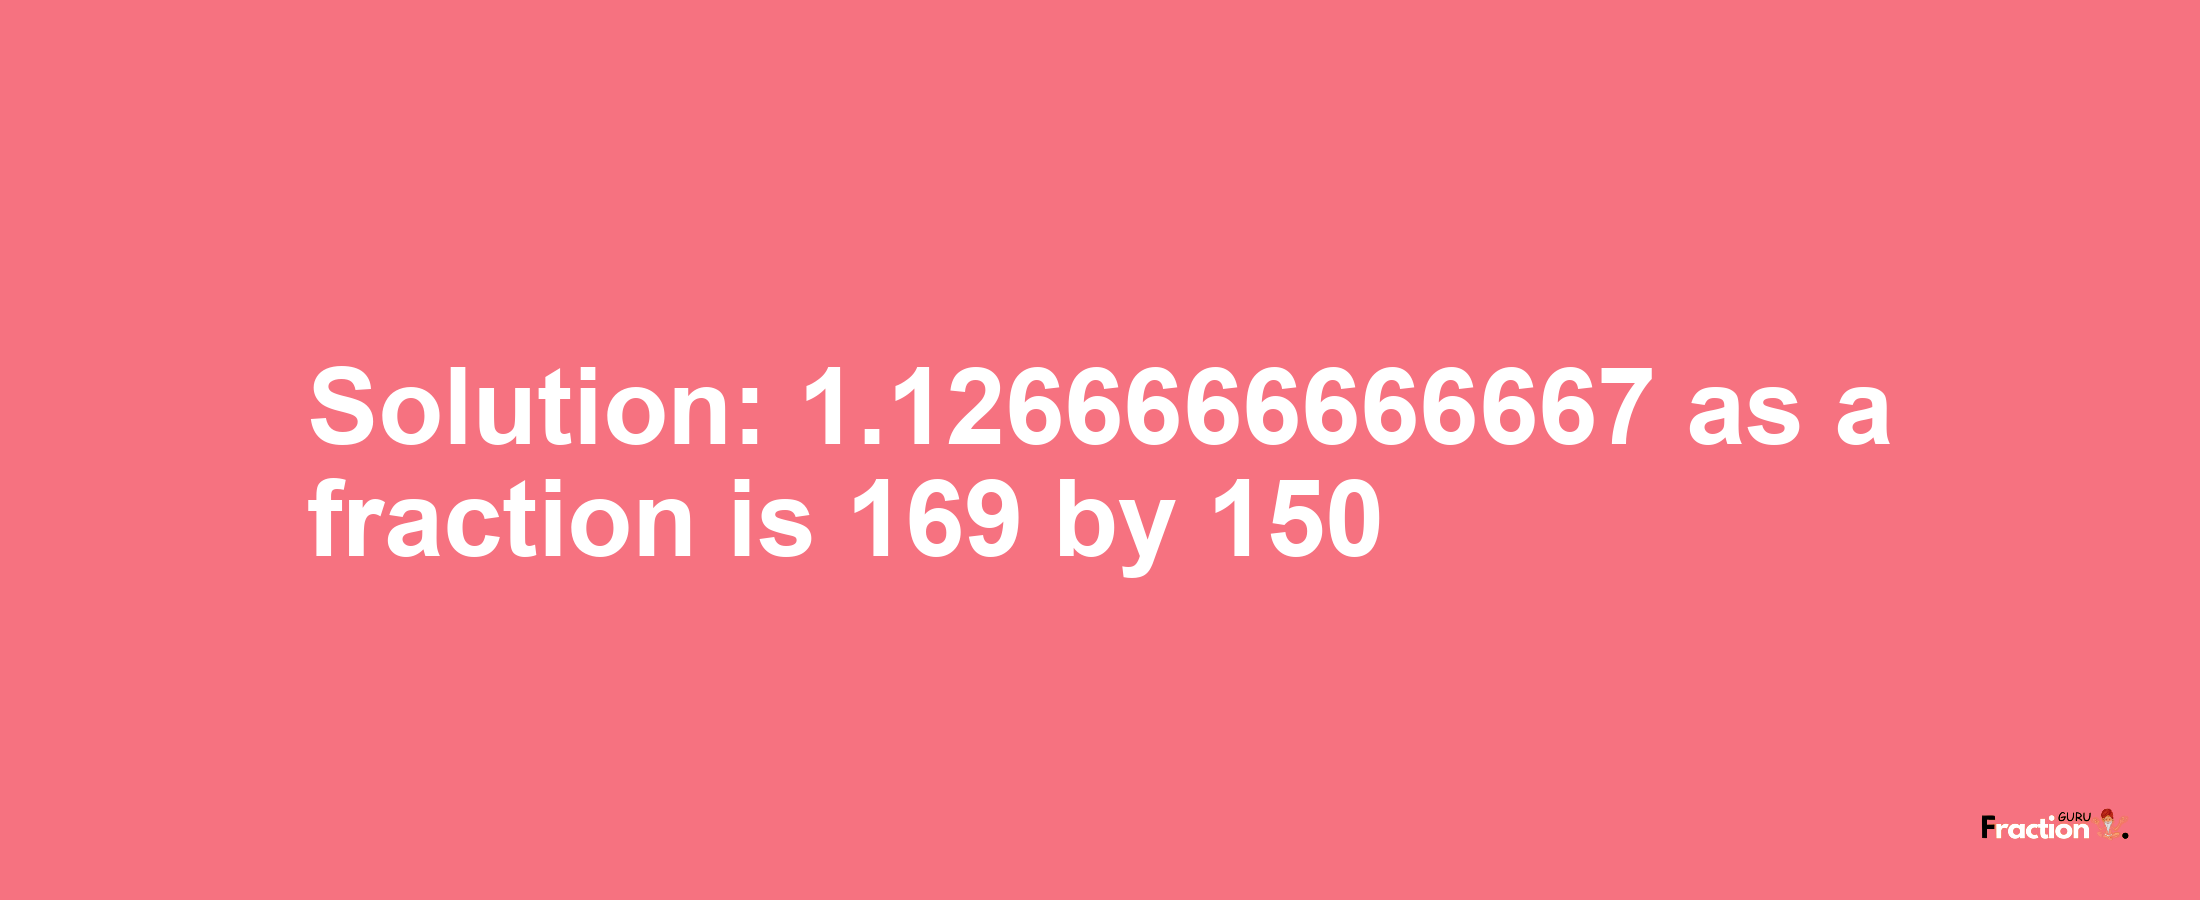 Solution:1.1266666666667 as a fraction is 169/150